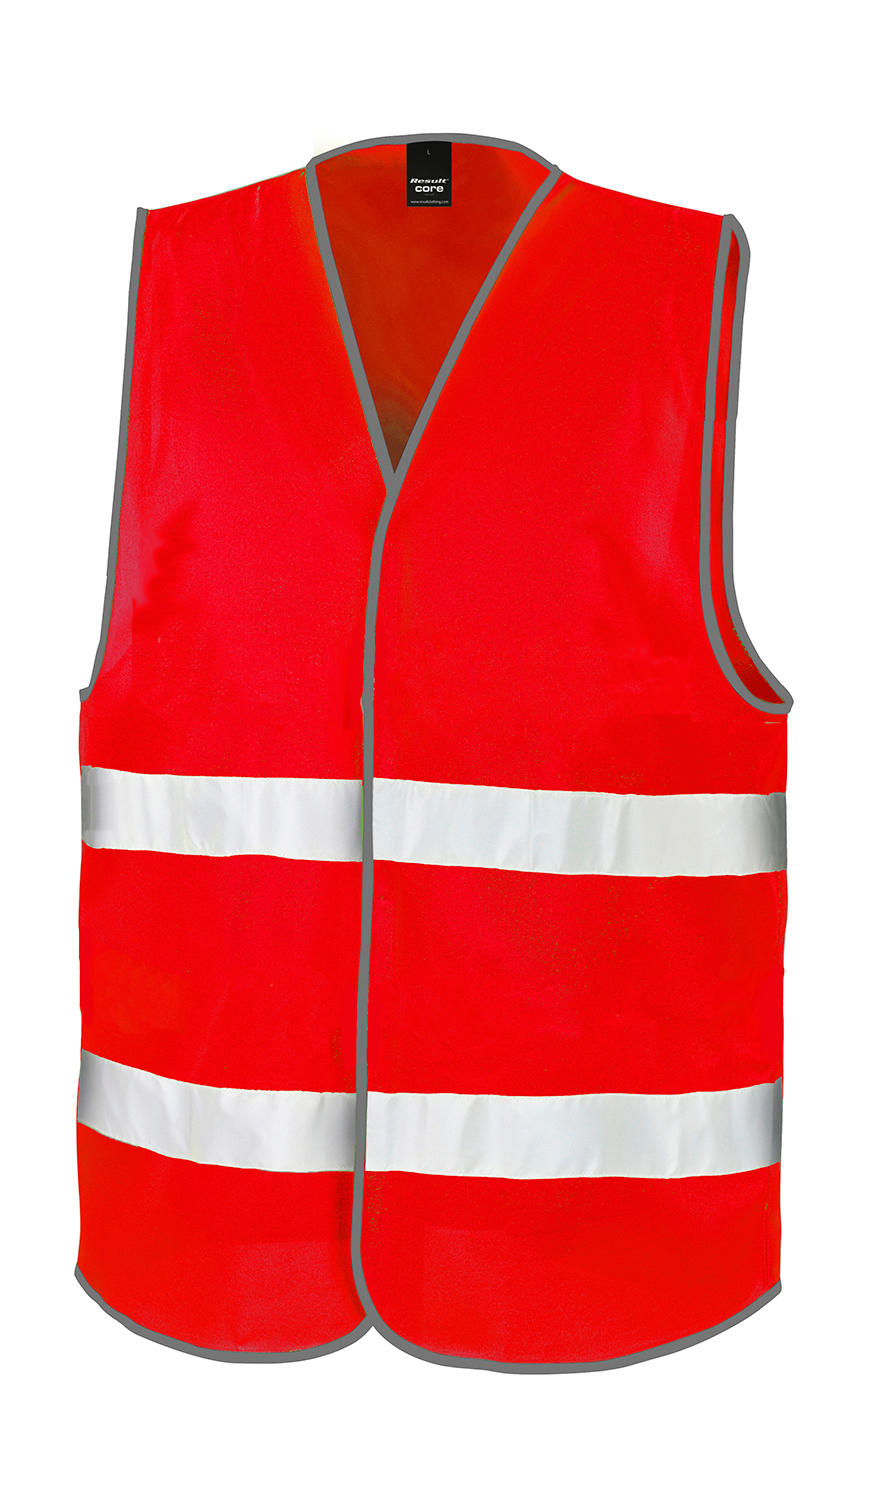  Core Enhanced Visibility Vest in Farbe Red